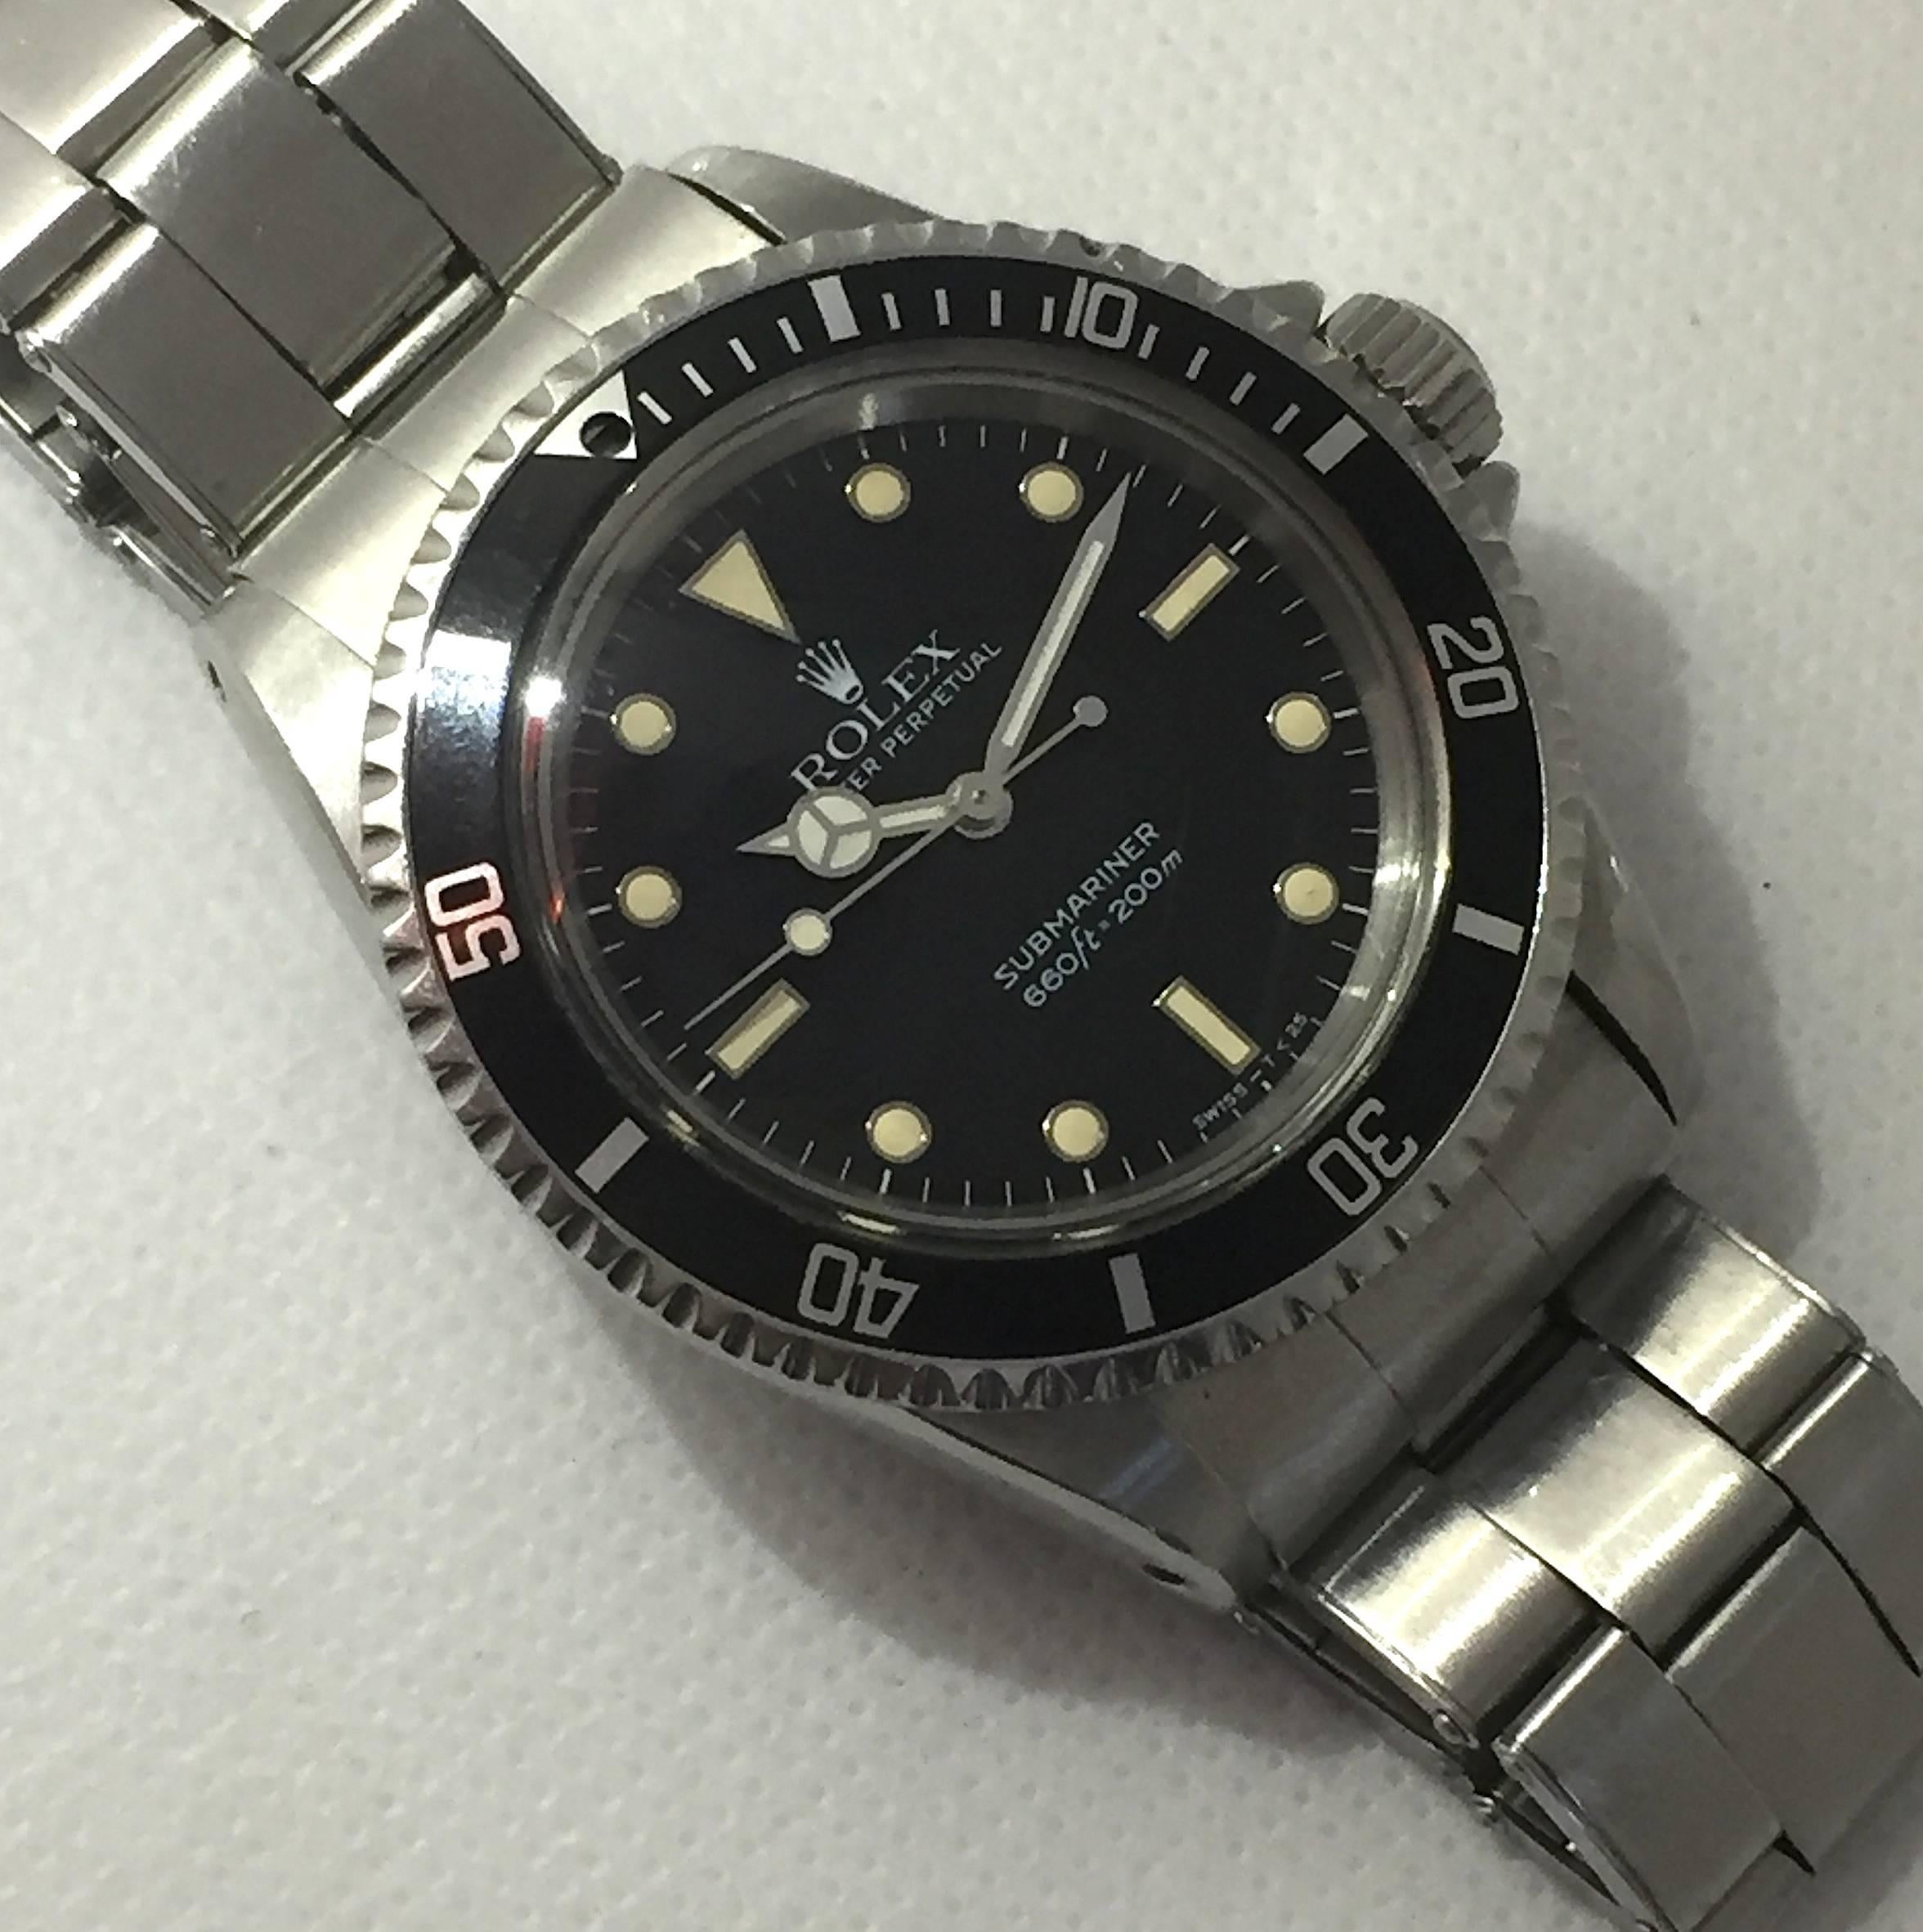 Rolex Stainless Steel Oyster Perpetual Submariner Wristwatch
Reference 5513
Factory Black Gloss Dial (Service Dial) with Applied Hour Markers with Metal Surrounds and Matching Hands.
Black Rotating Bezel (Pearl Missing)
40mm in size 
Rolex Calibre